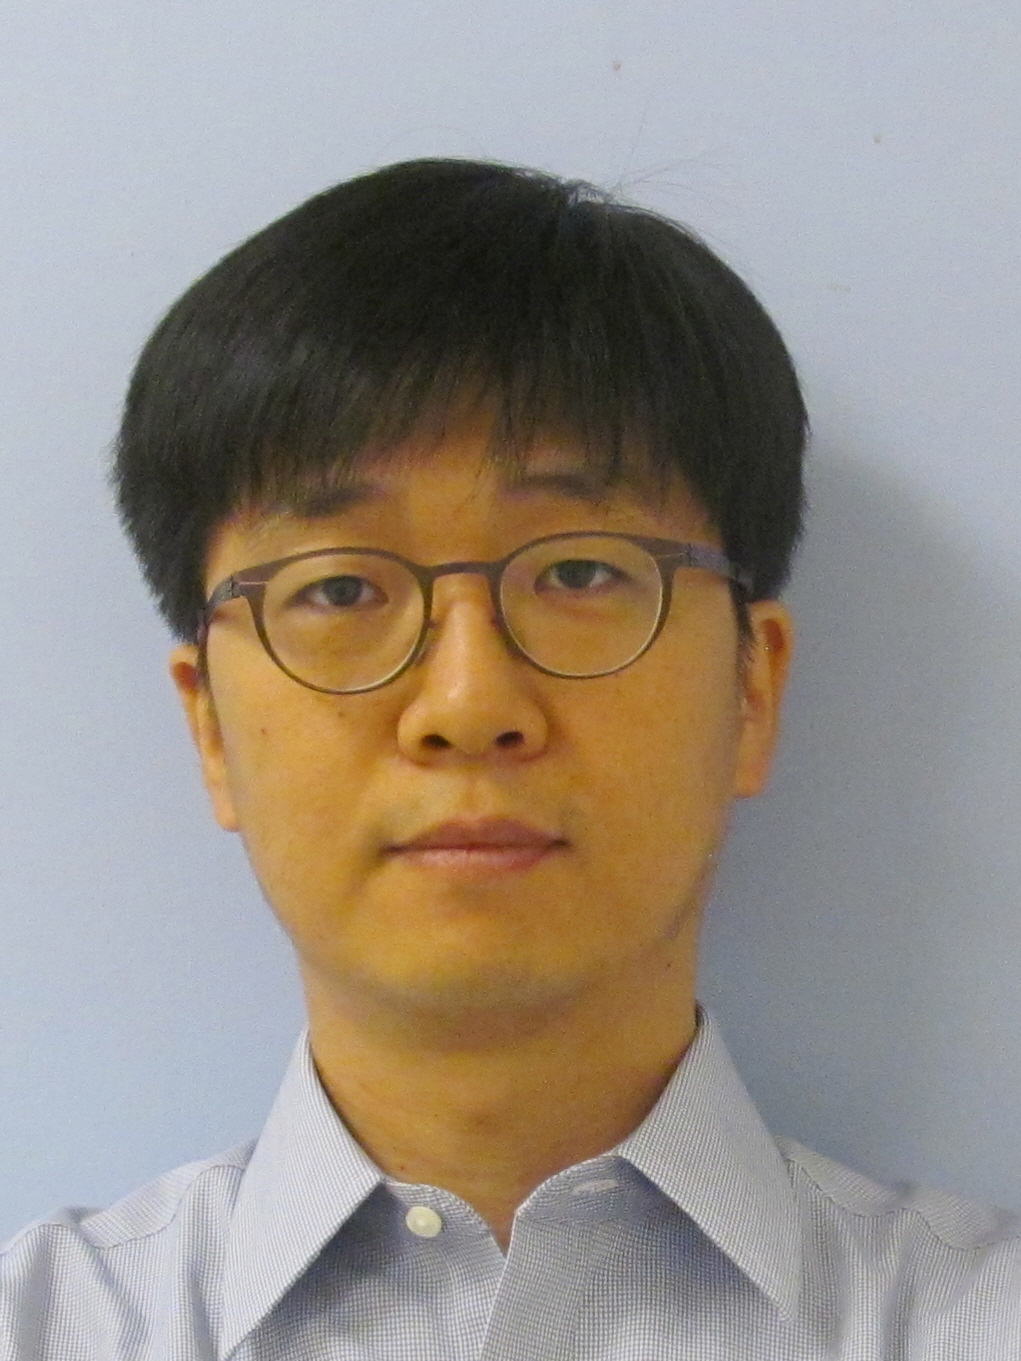 Headshot of Dongwon Lee, a man with short dark hair cut in a bowl cut, wears glasses and looks at the camera with a serious expression.